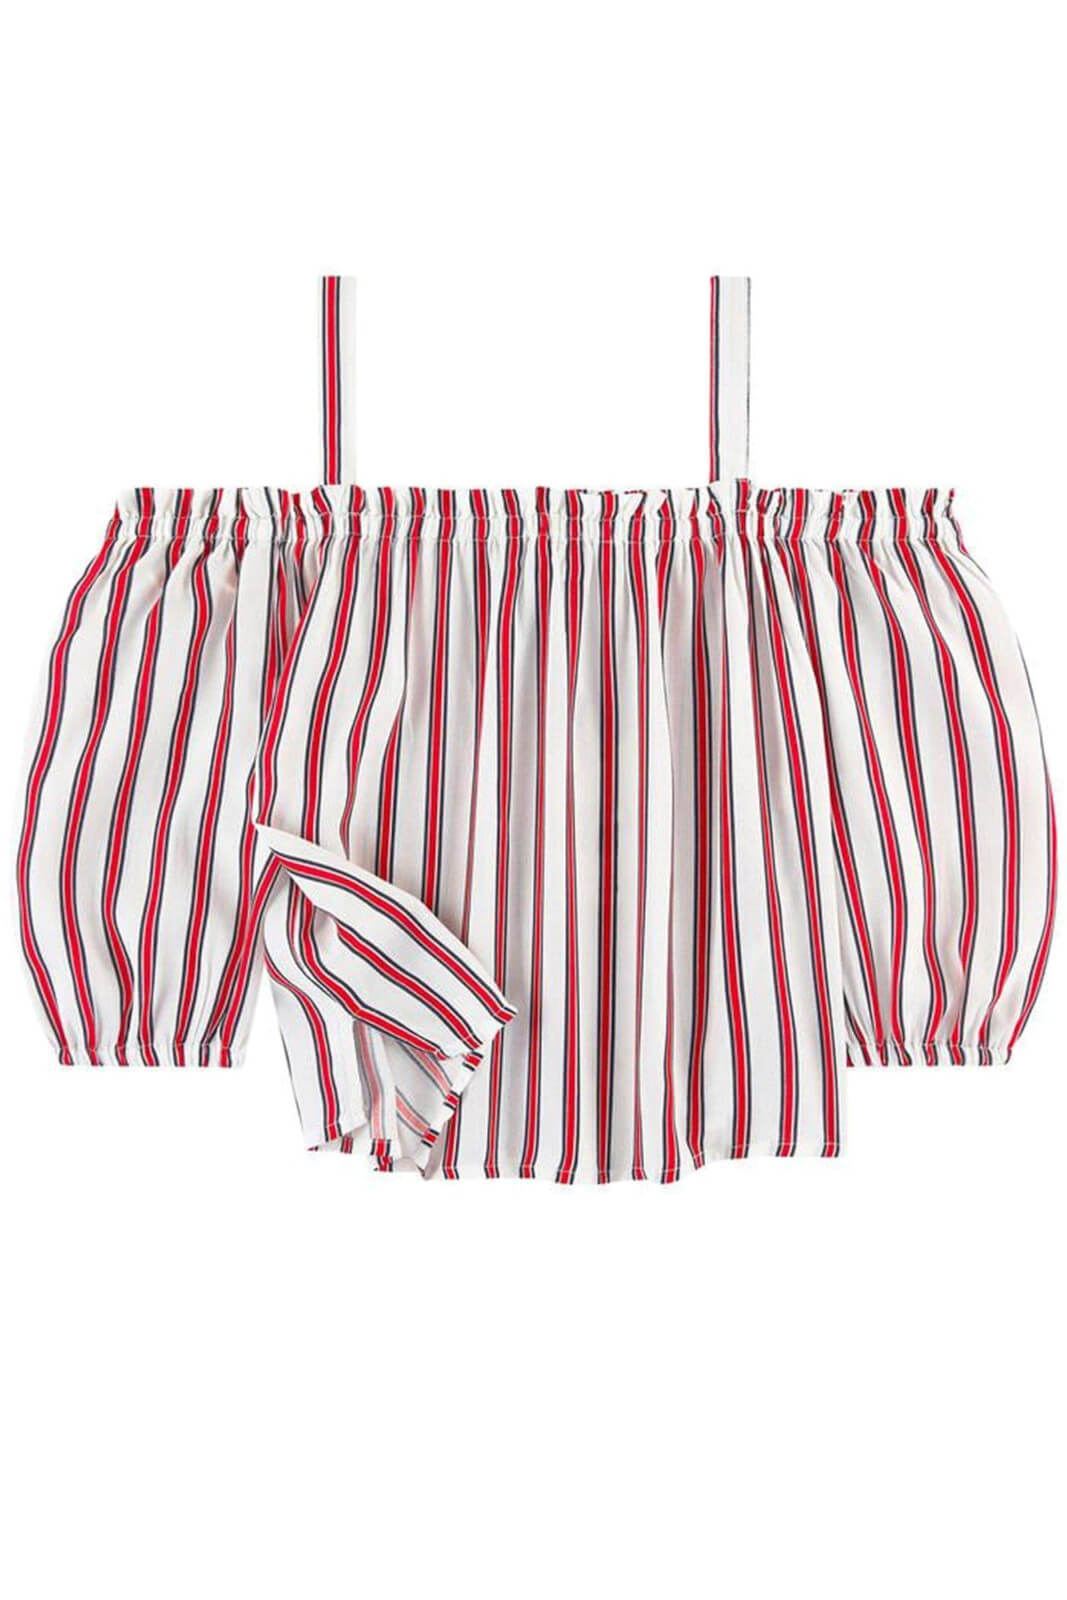 Pepe Jeans girl's top with striped pattern MILA